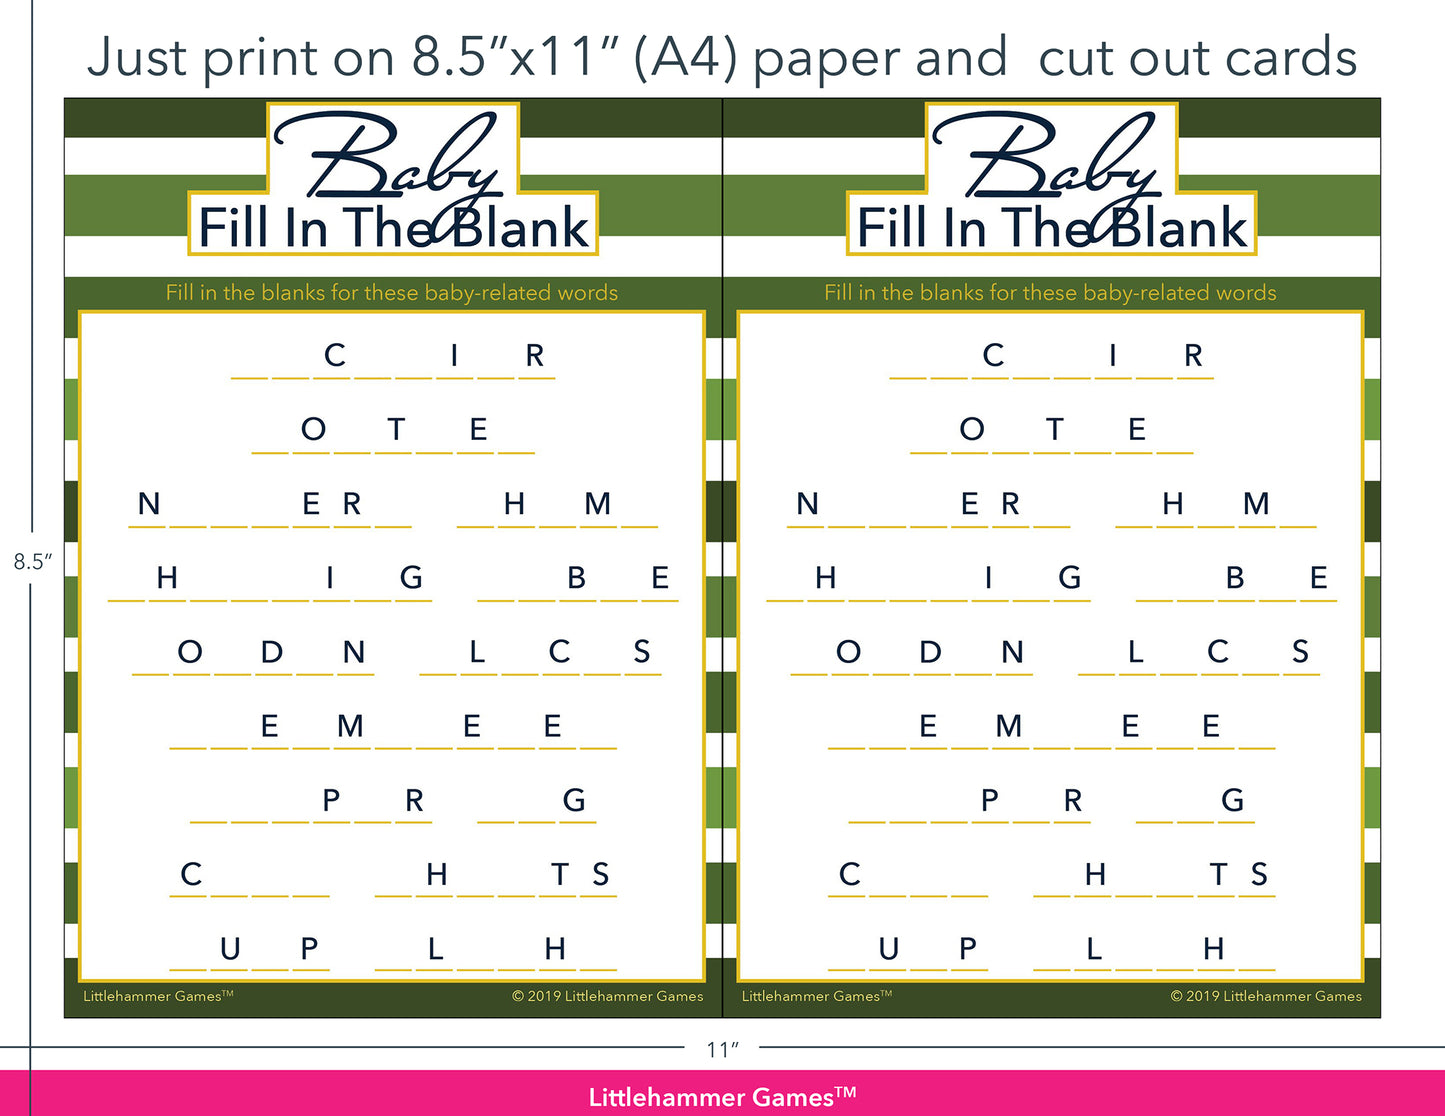 Baby Fill in the Blank green striped game cards with printing instructions